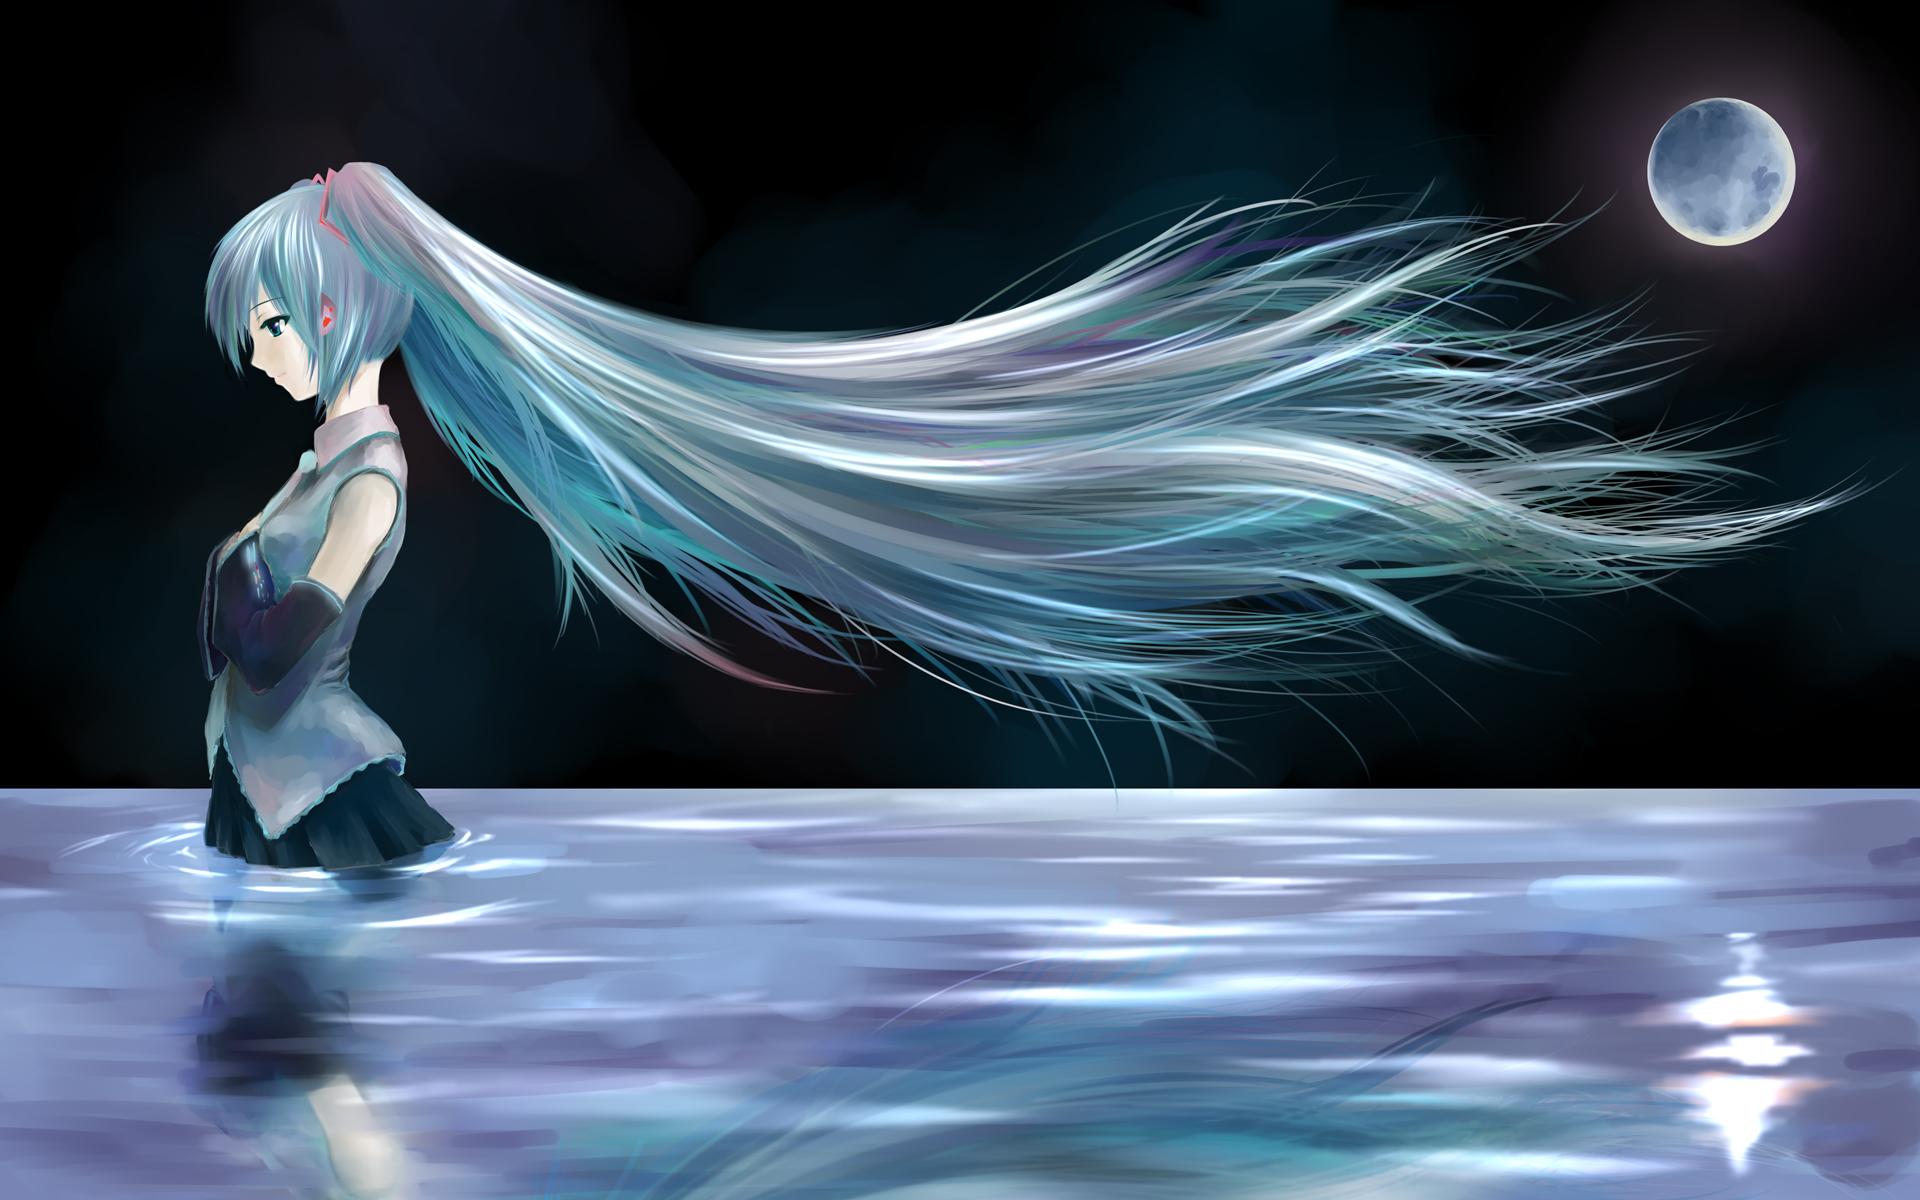 Hatsune Miku standing under a clear night sky with a blue hue.